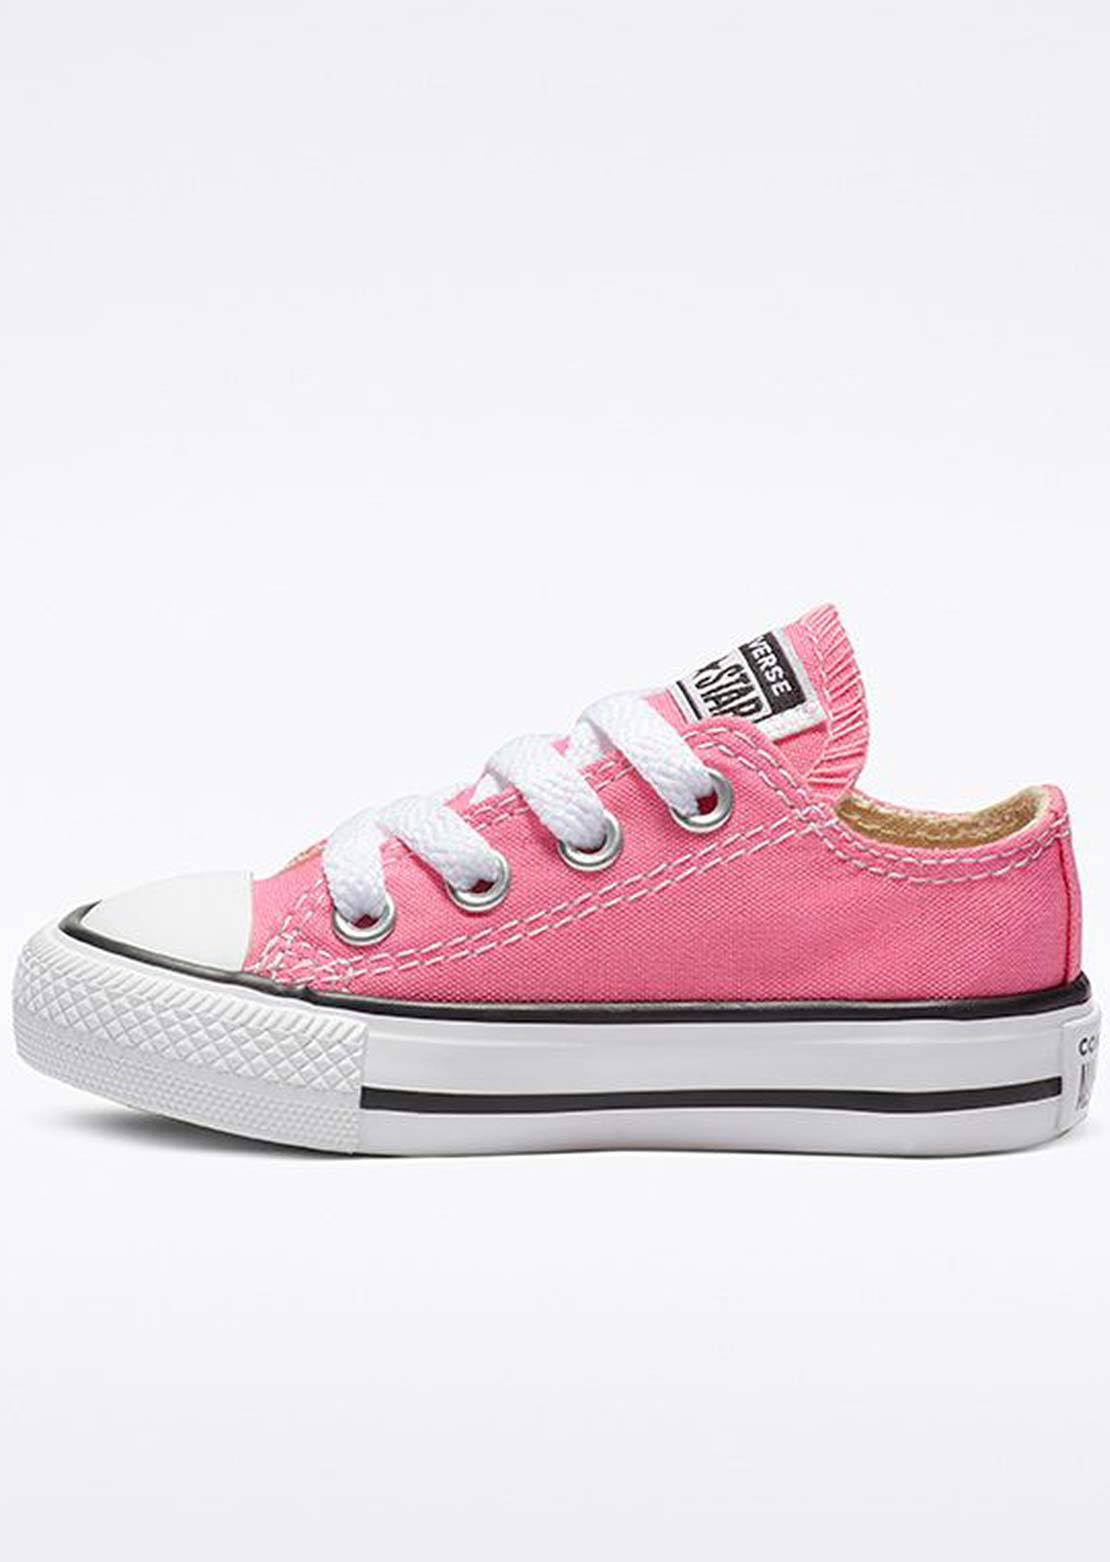 Converse Infant Chuck Taylor All Star Low-Top Shoes Pink